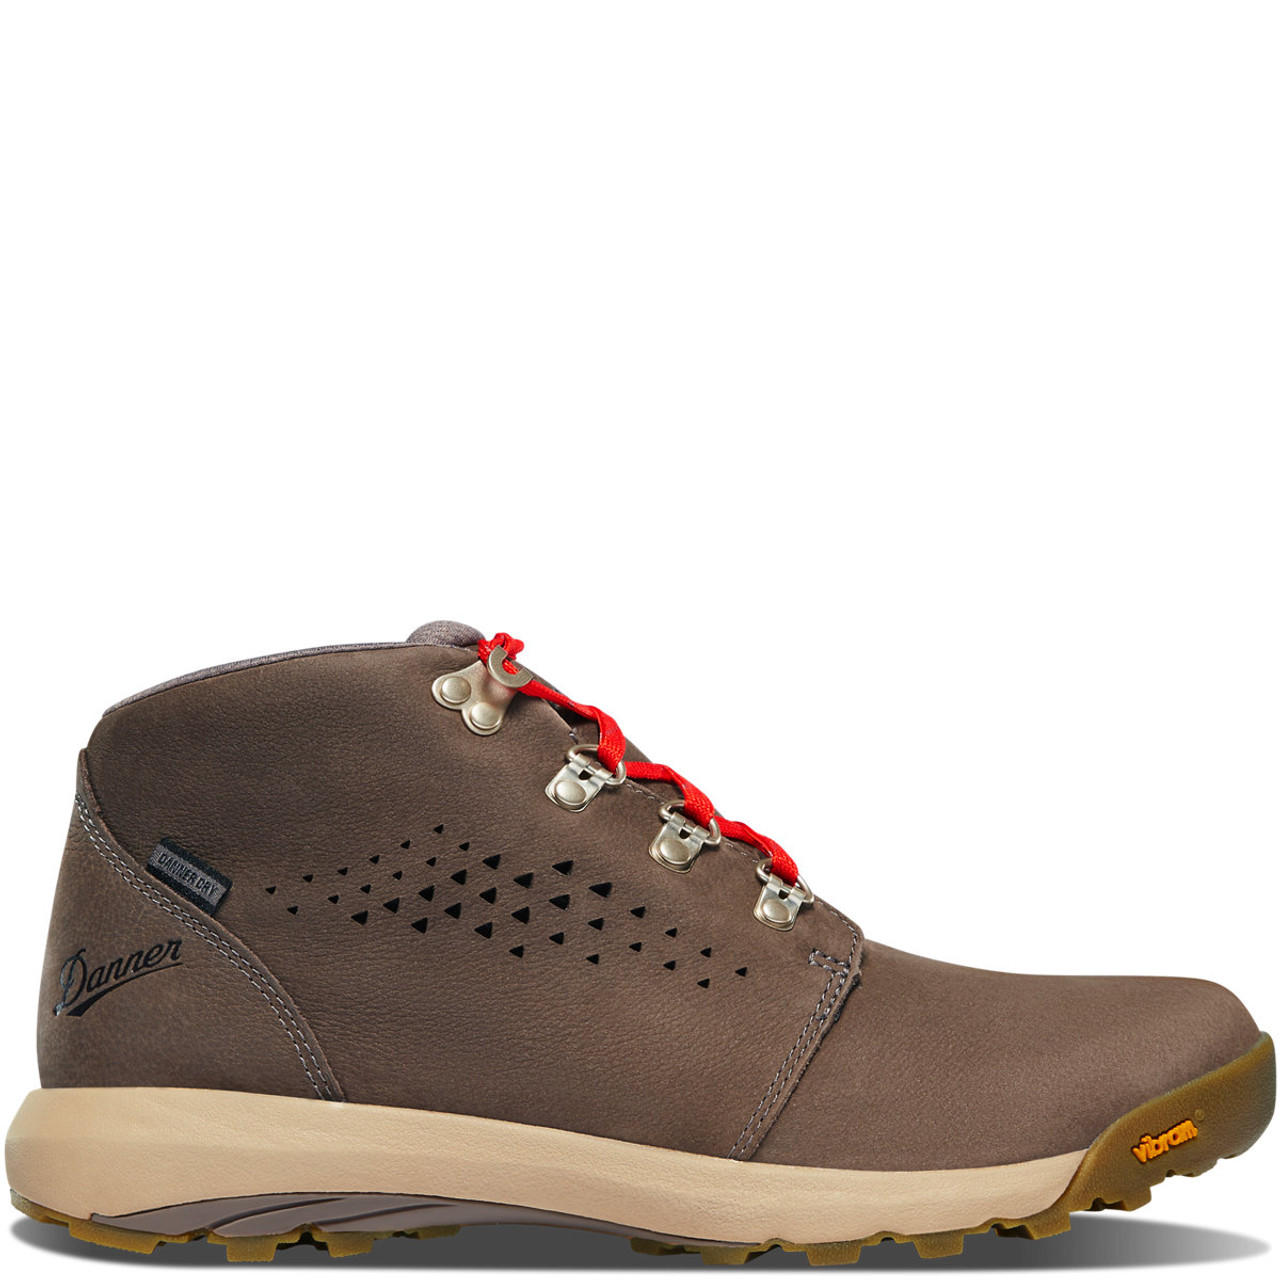 DANNER® INQUIRE CHUKKA WOMEN'S SIZING IRON/PICANTE HIKE BOOTS 64505